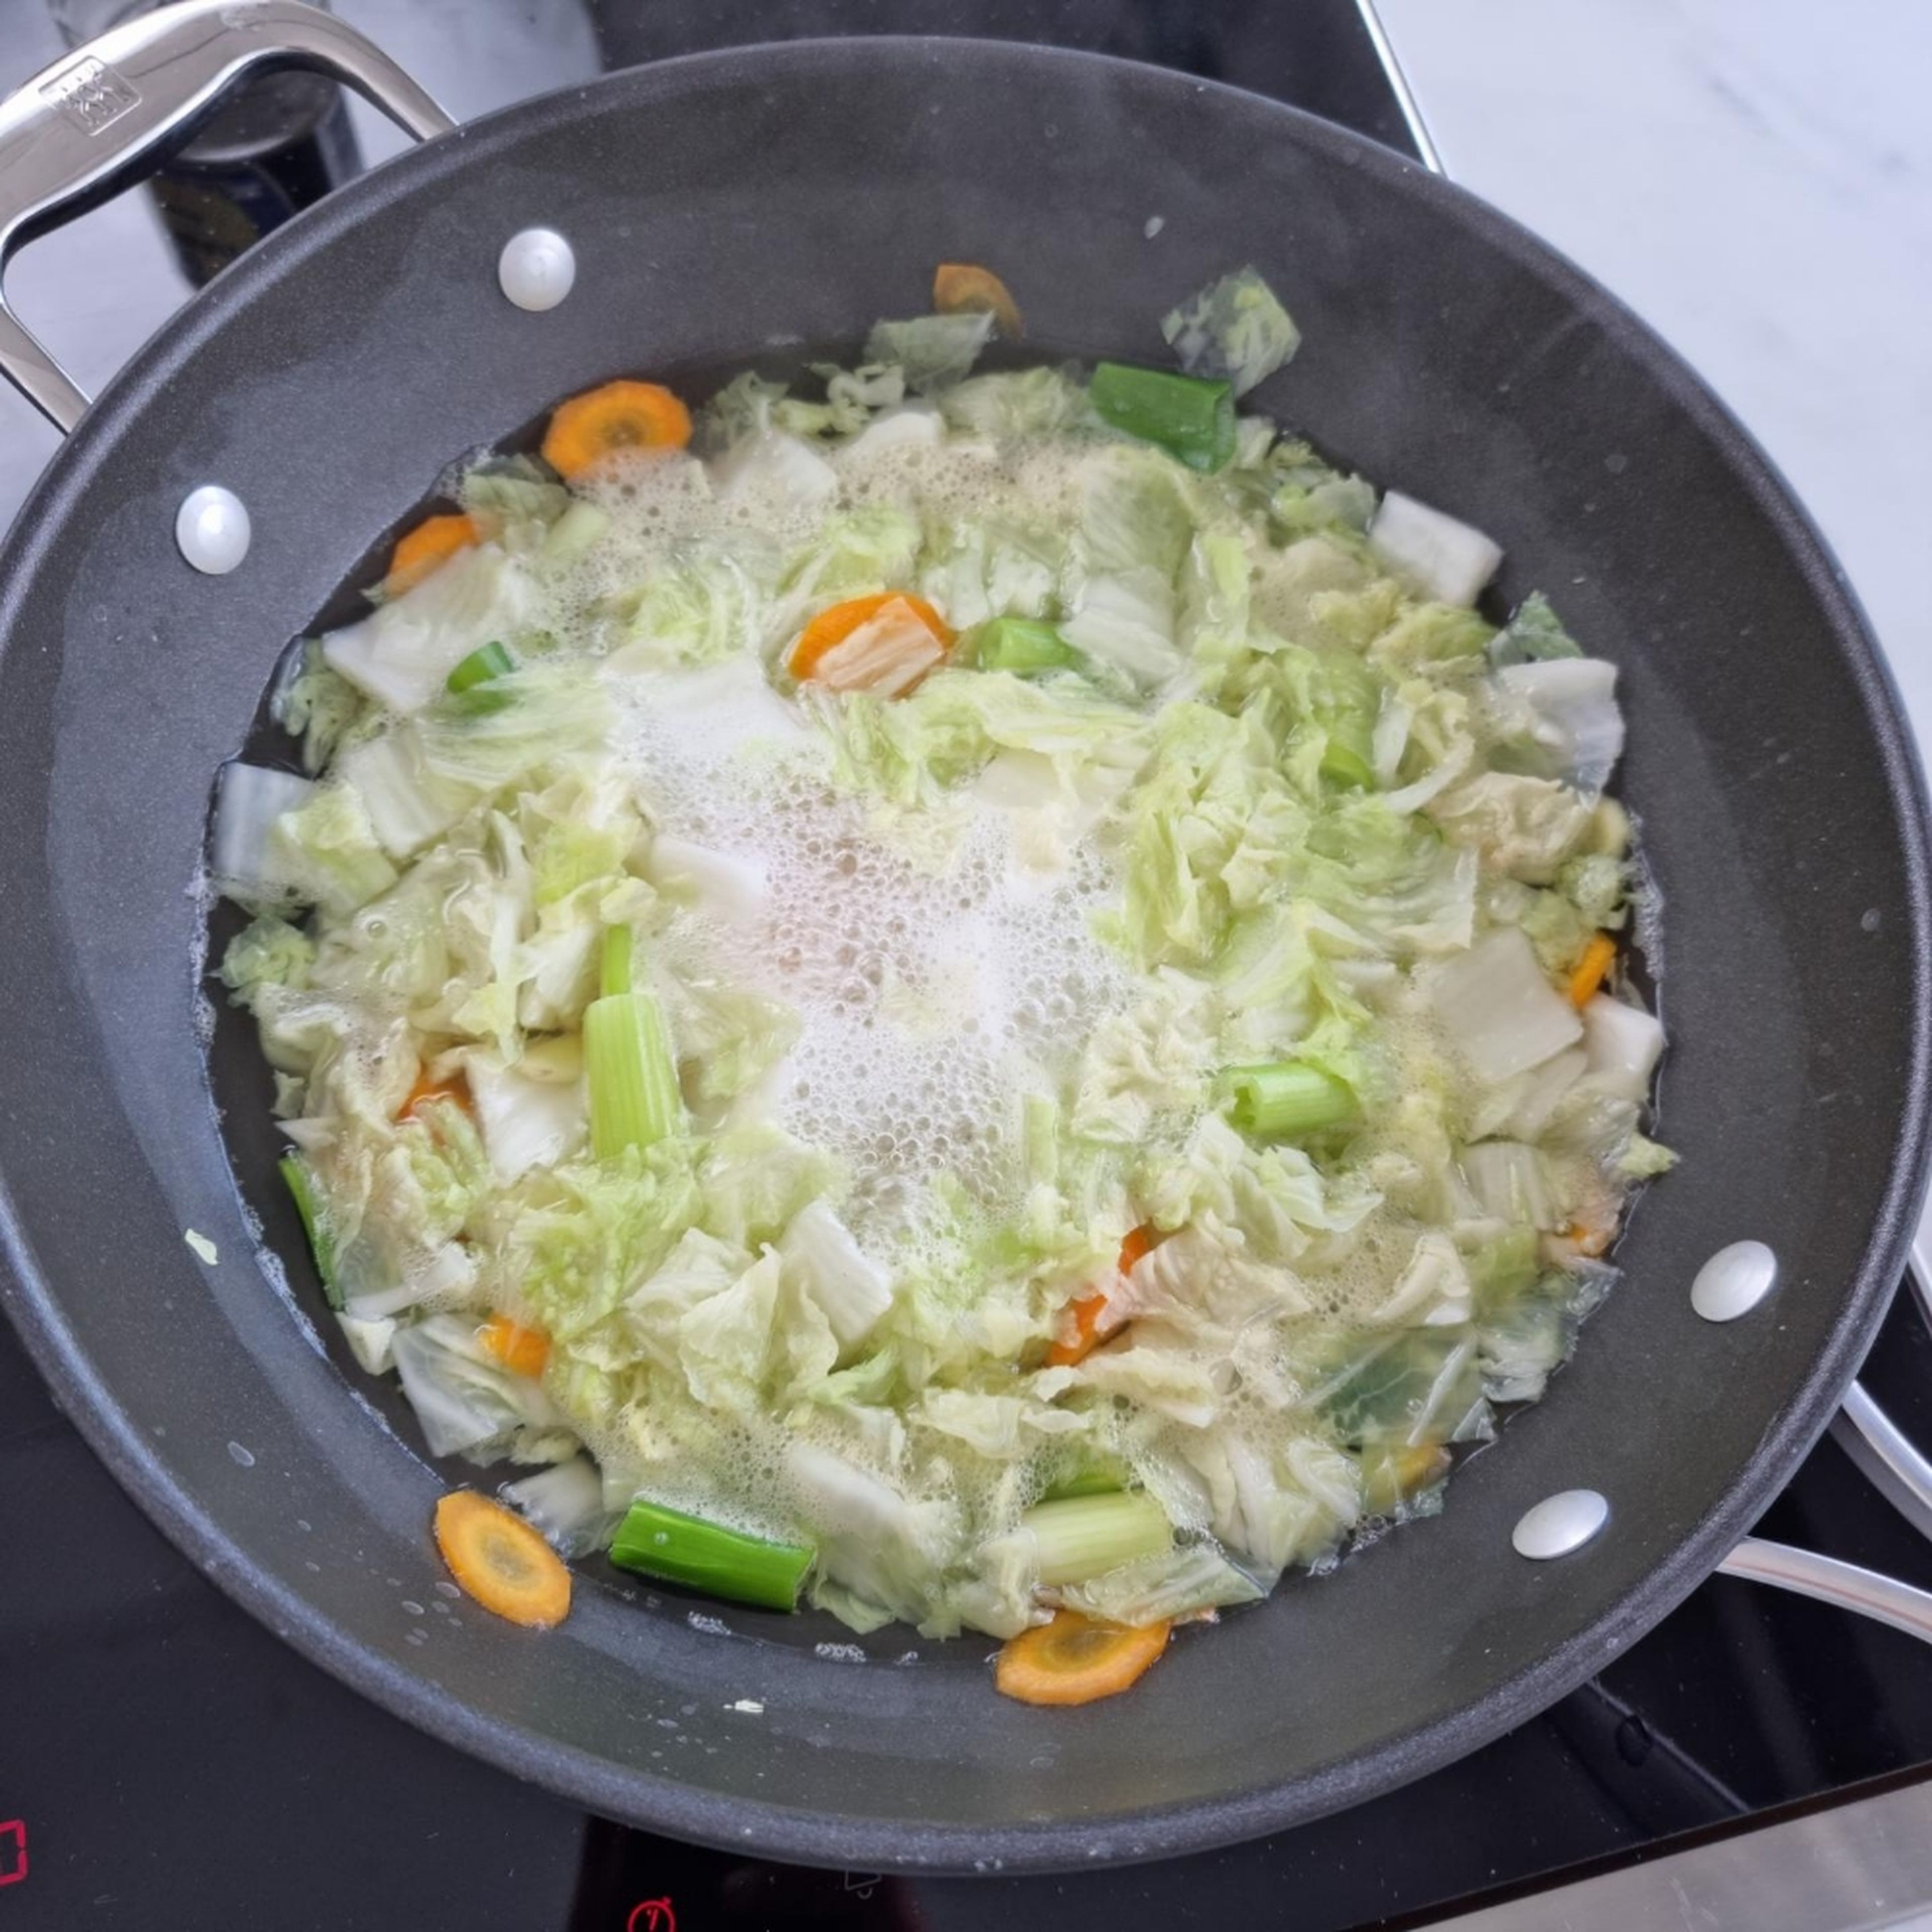 In a saucepan bring water to a boil.
Add cabbage, scallion, ginger and carrot and let simmer for approx. 30 min.